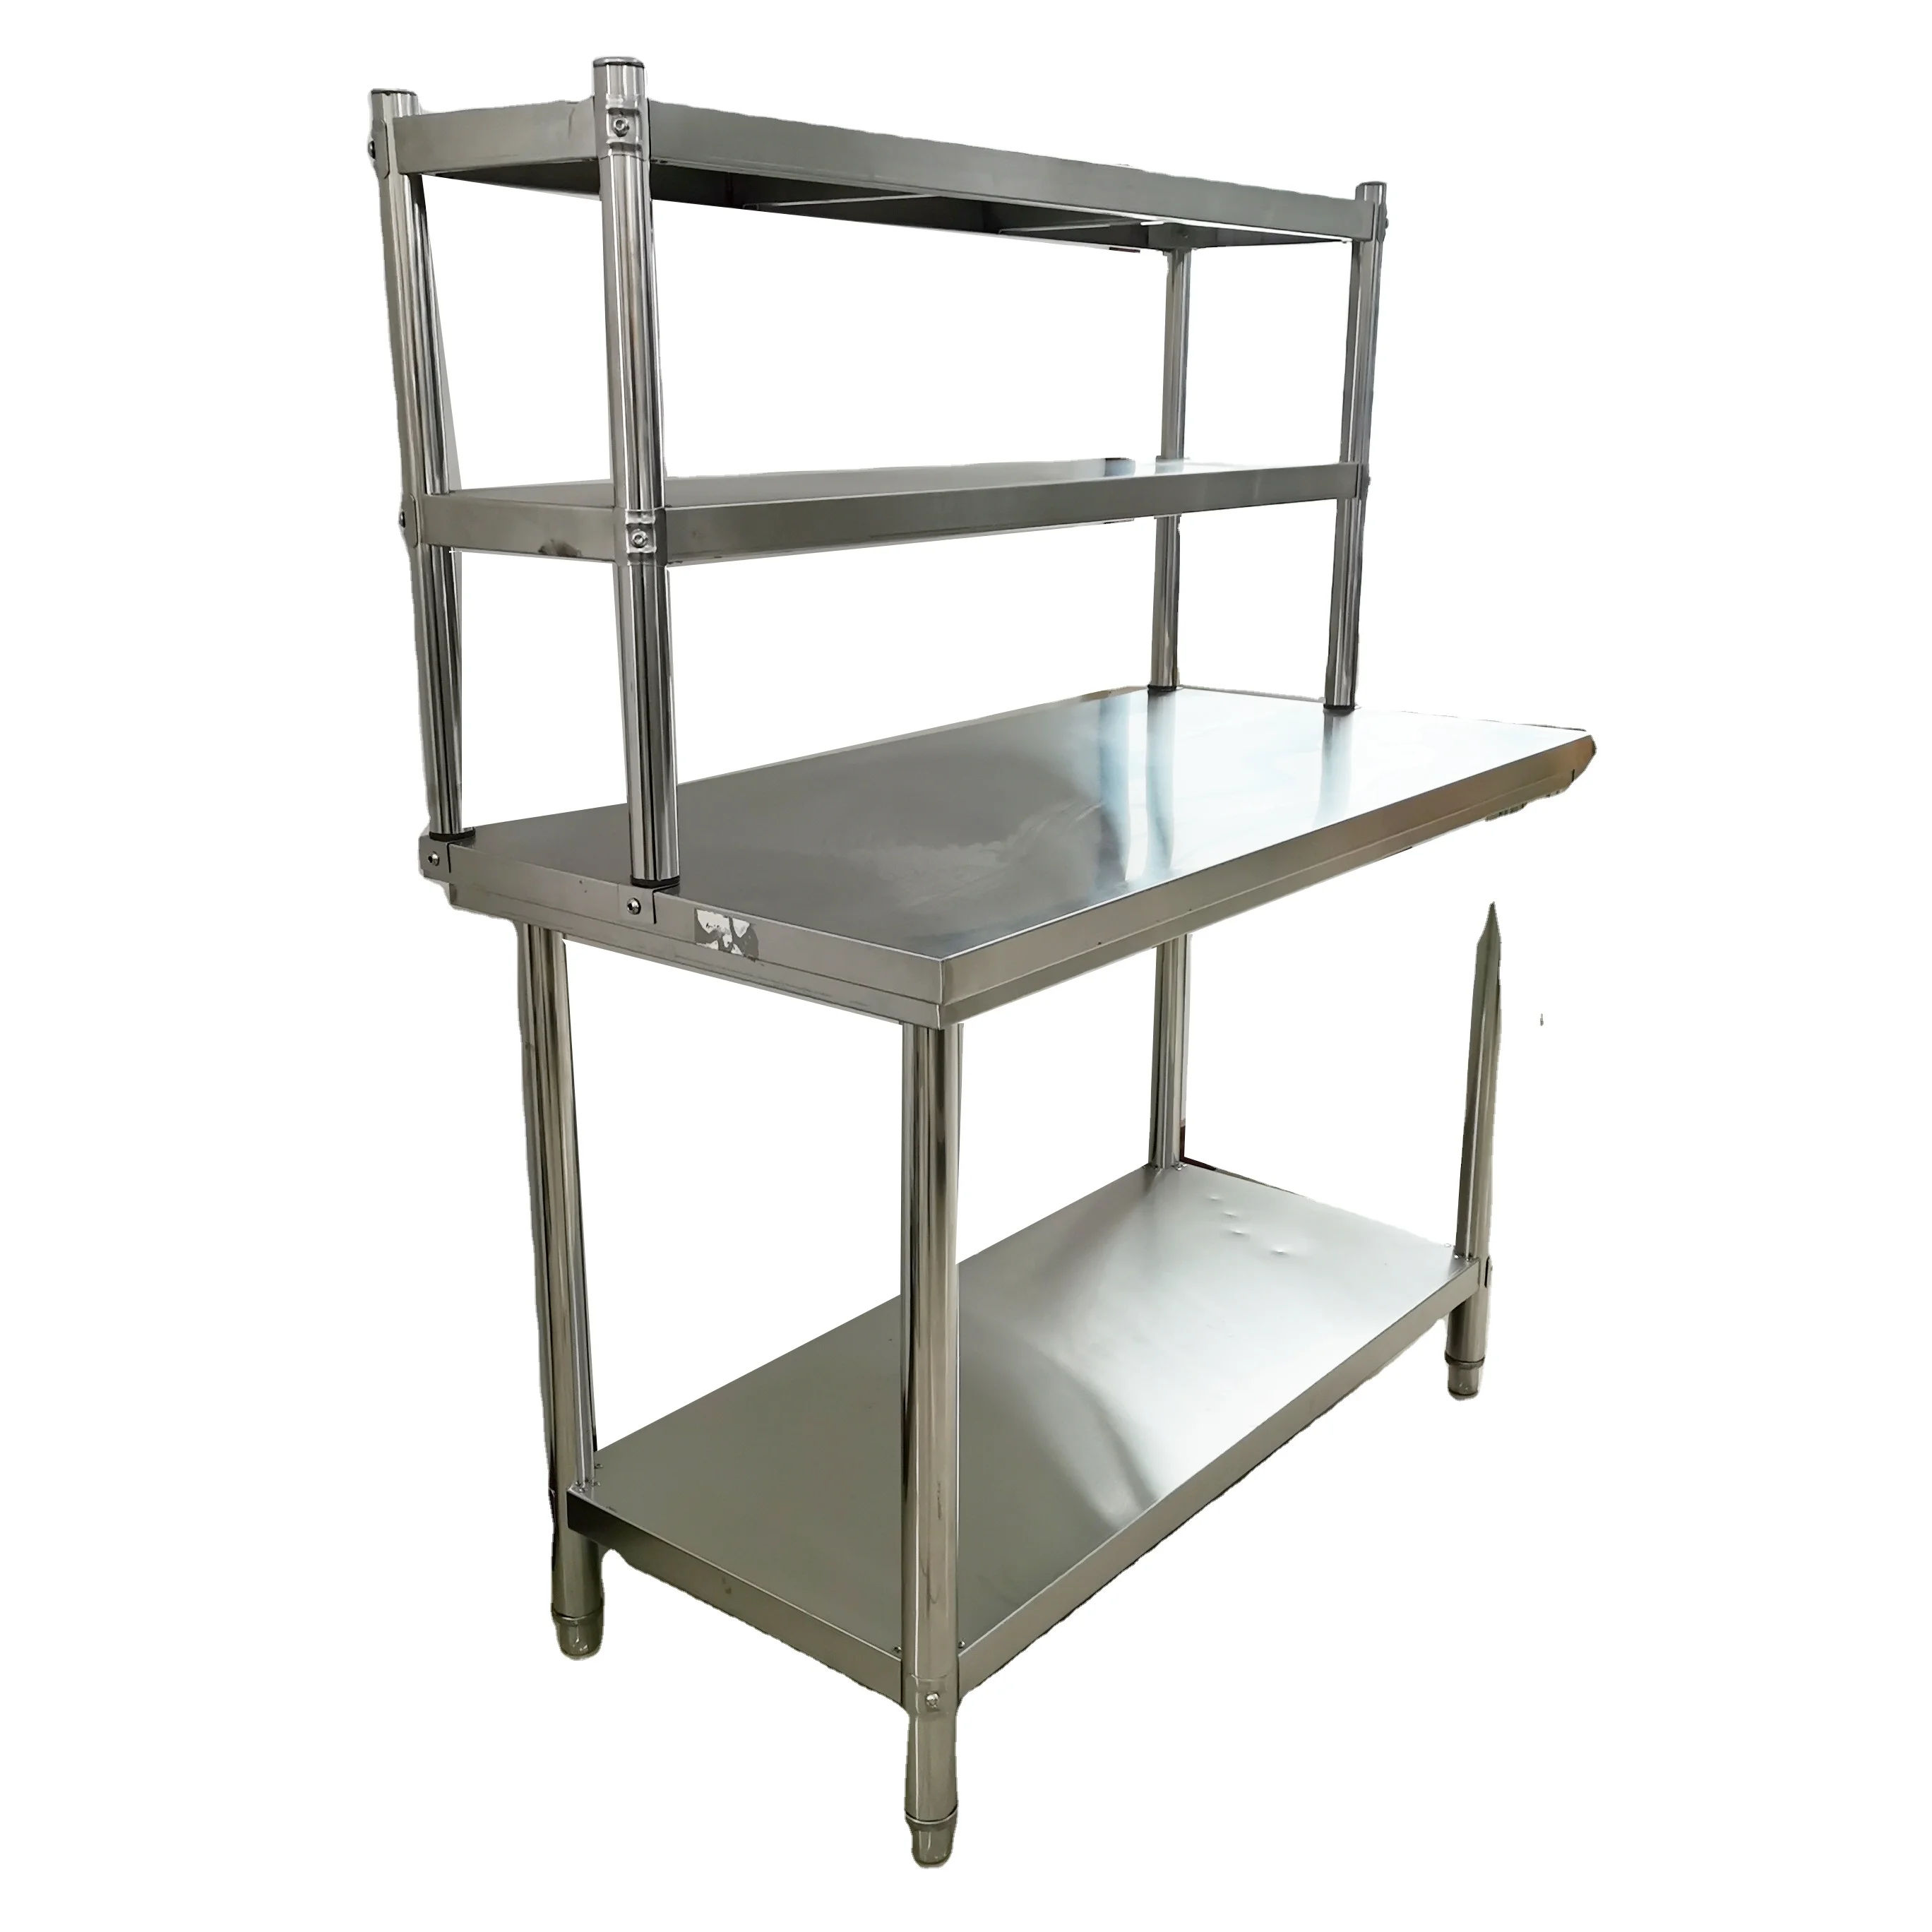 Stainless Steel Shelf 1200 x 200mm for Commercial Kitchens Workshops and Stores 